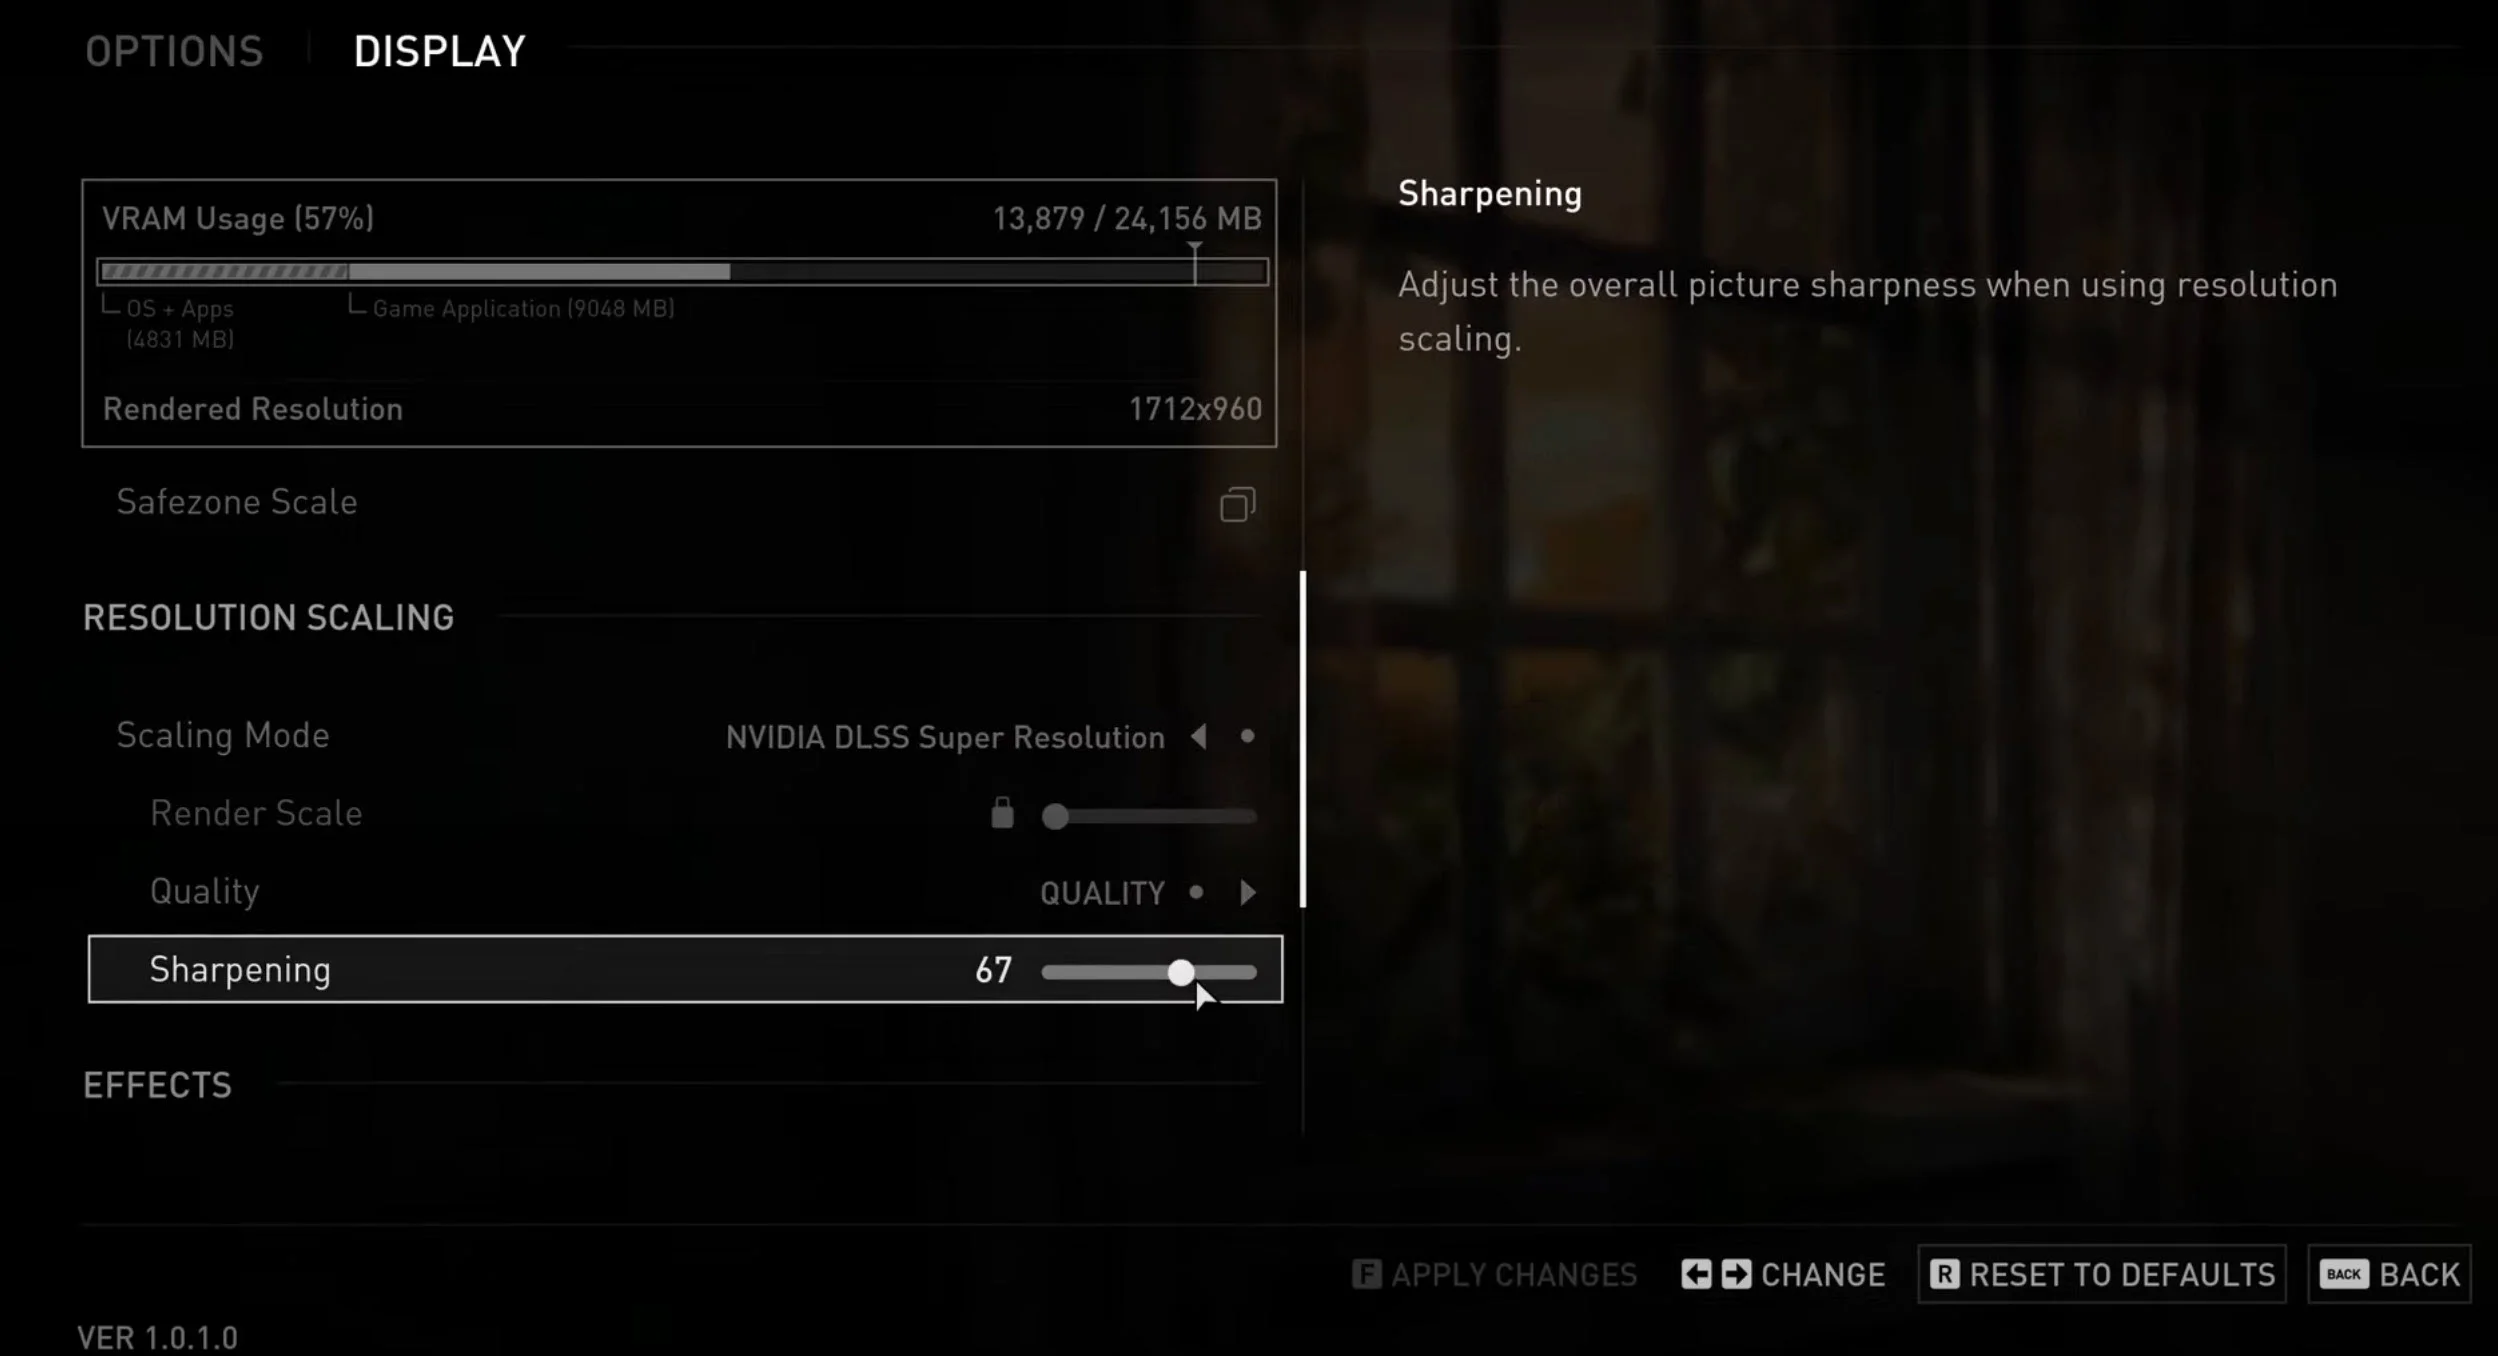 The Last of Us Patch 1.0.5 Performance - HUGE IMPROVEMENTS TO VRAM AND RAM!  